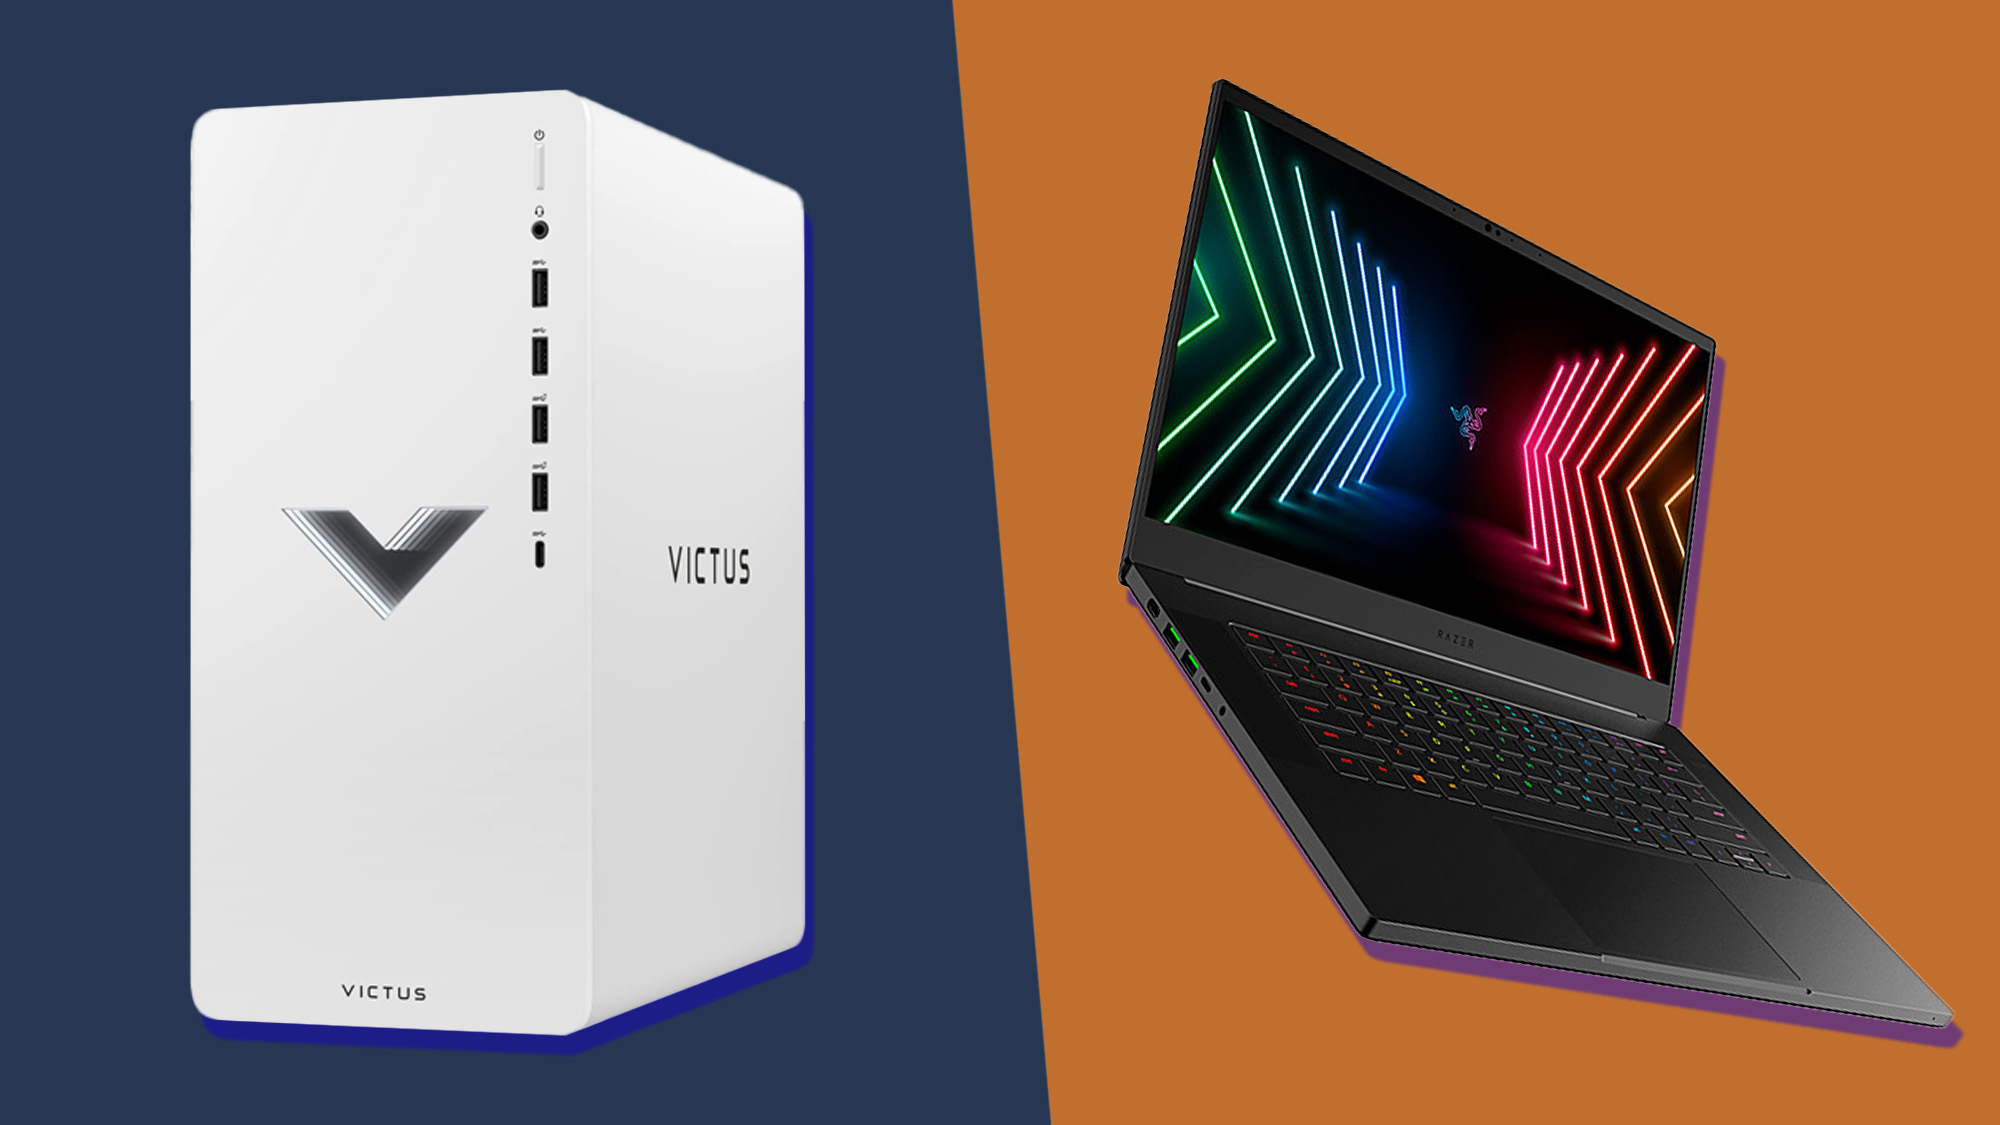 Gaming PC vs gaming laptop which PC gaming option is better for your